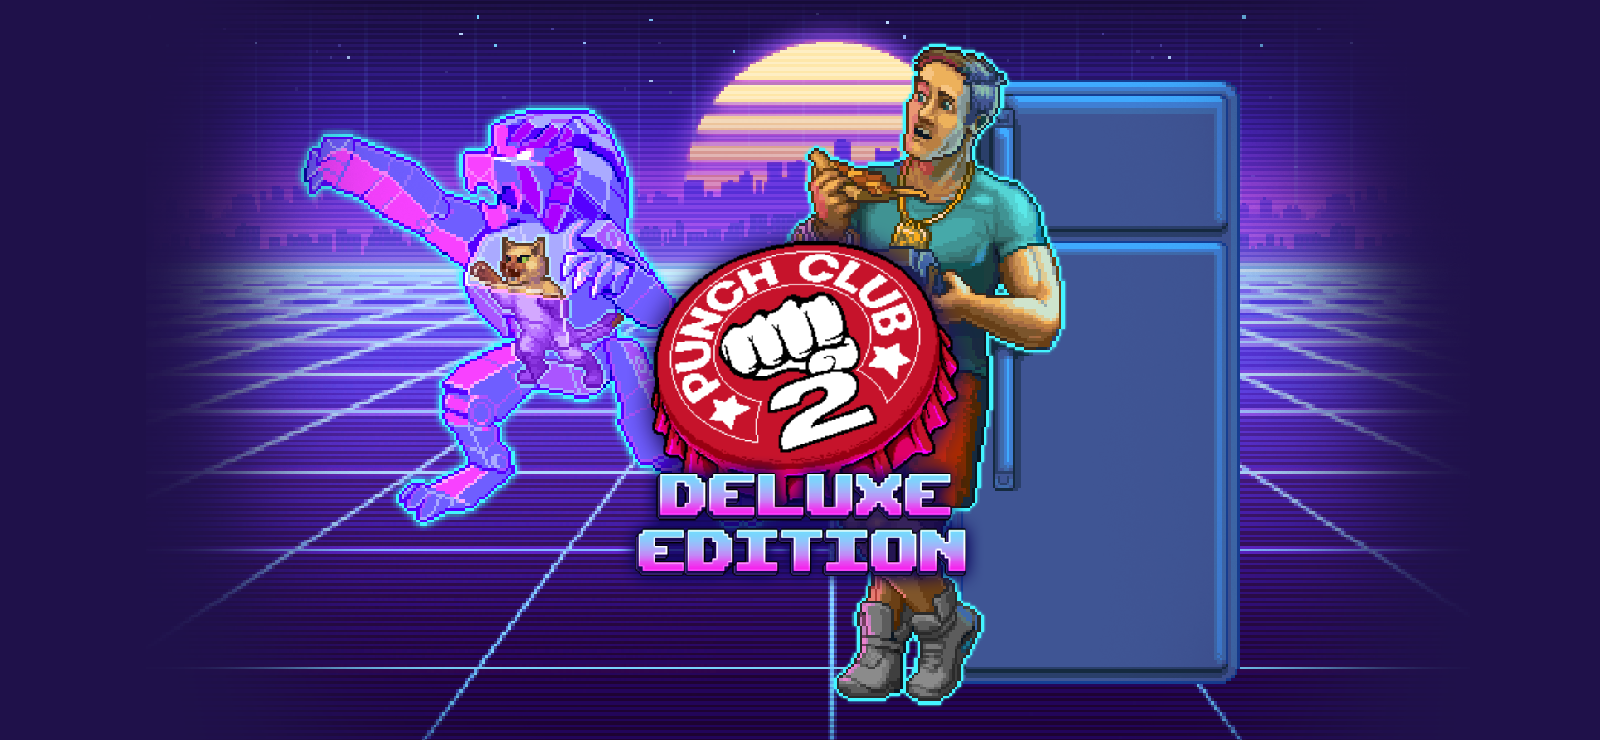 Punch Club 2: Fast Forward Deluxe